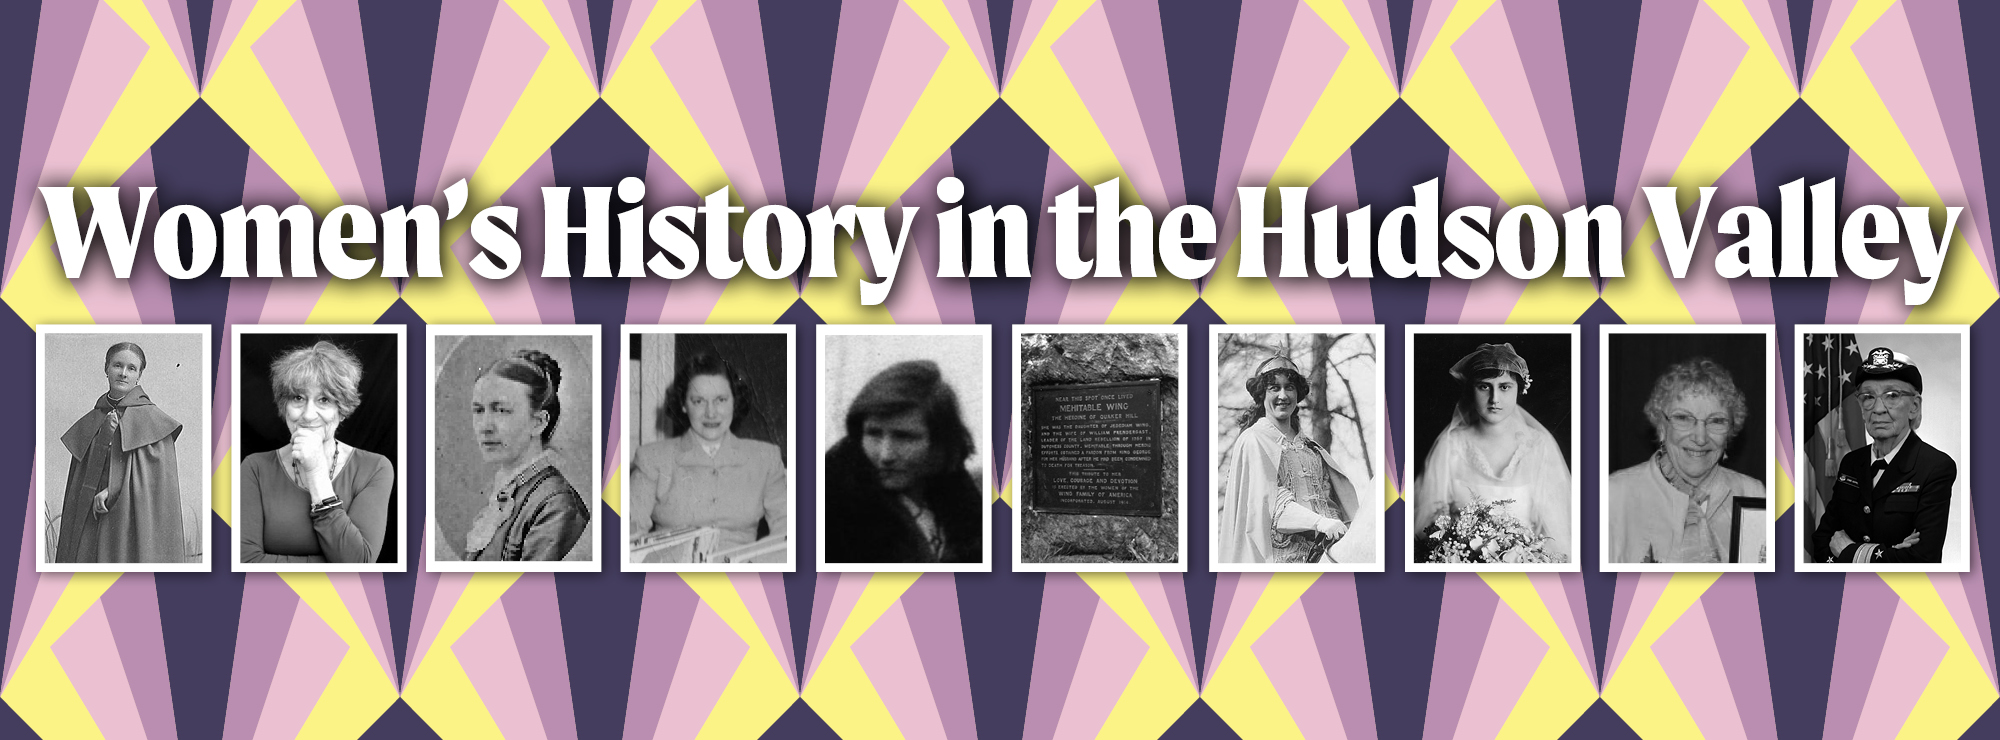 Women's History in the Hudson Valley